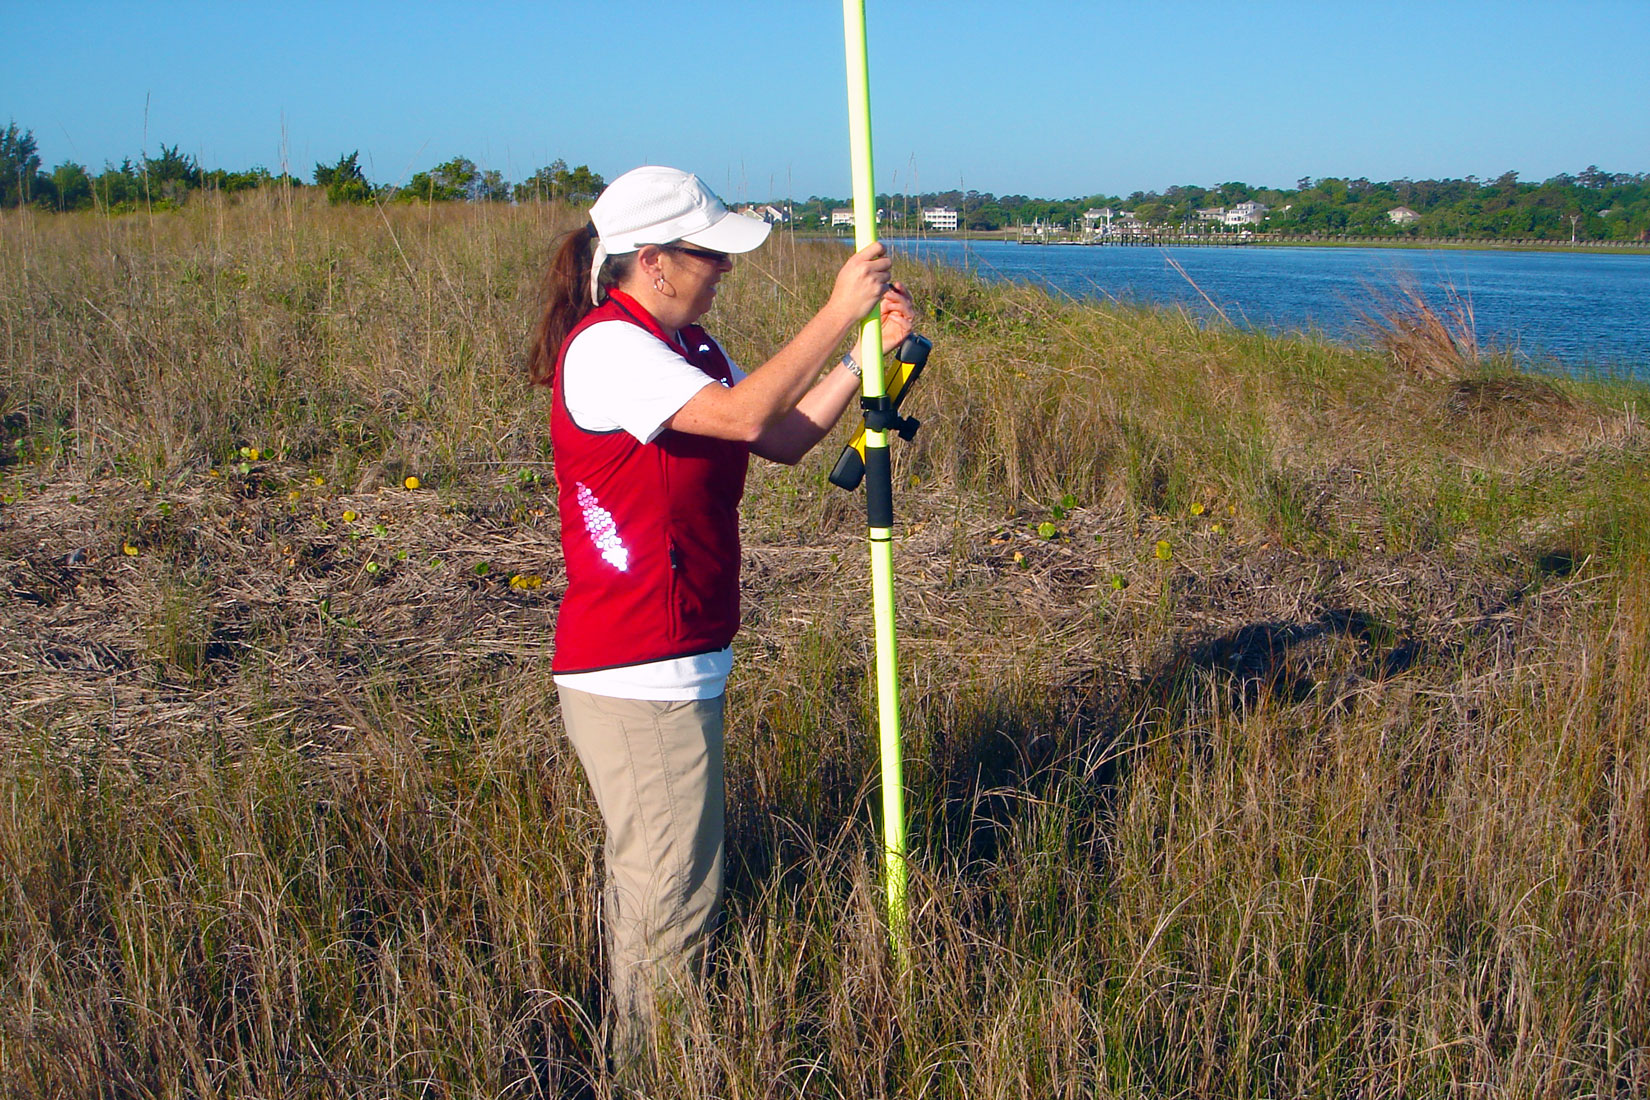 UNCW Professor Joanne Halls uses Global Positioning Systems (GPS) to create map boundaries for different wetland species as well as upland habitats on Masonboro Island, a coastal site within the National Estuarine Research Reserve System (NERRS). NERRS is a network of 30 coastal sites designated to protect and study estuarine systems.